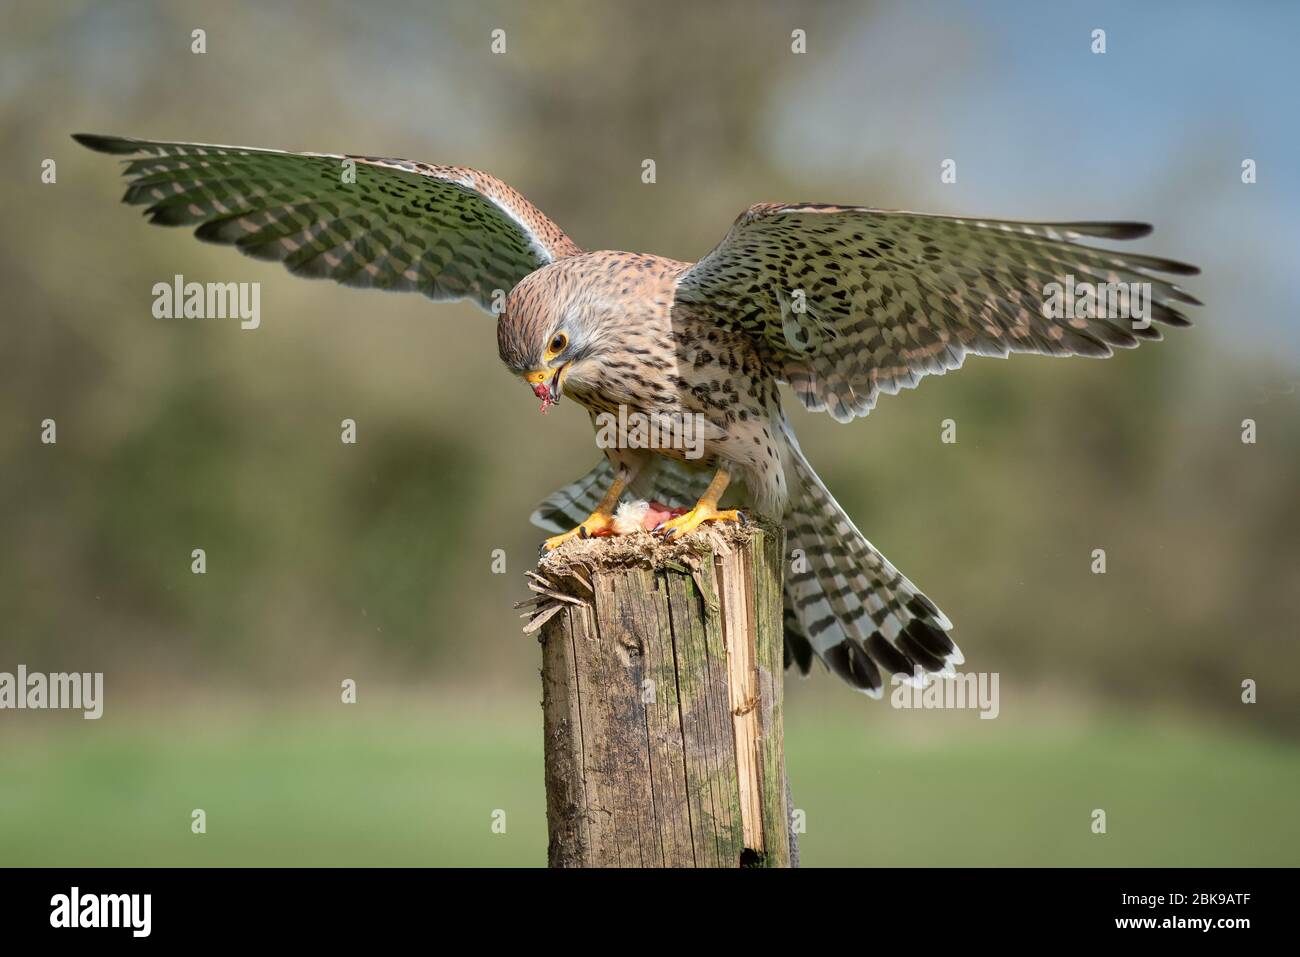 A captive kestrel, Falco tinnunculus, with wings out spread landing on an old wooden post. It has food on its beak from its prey Stock Photo